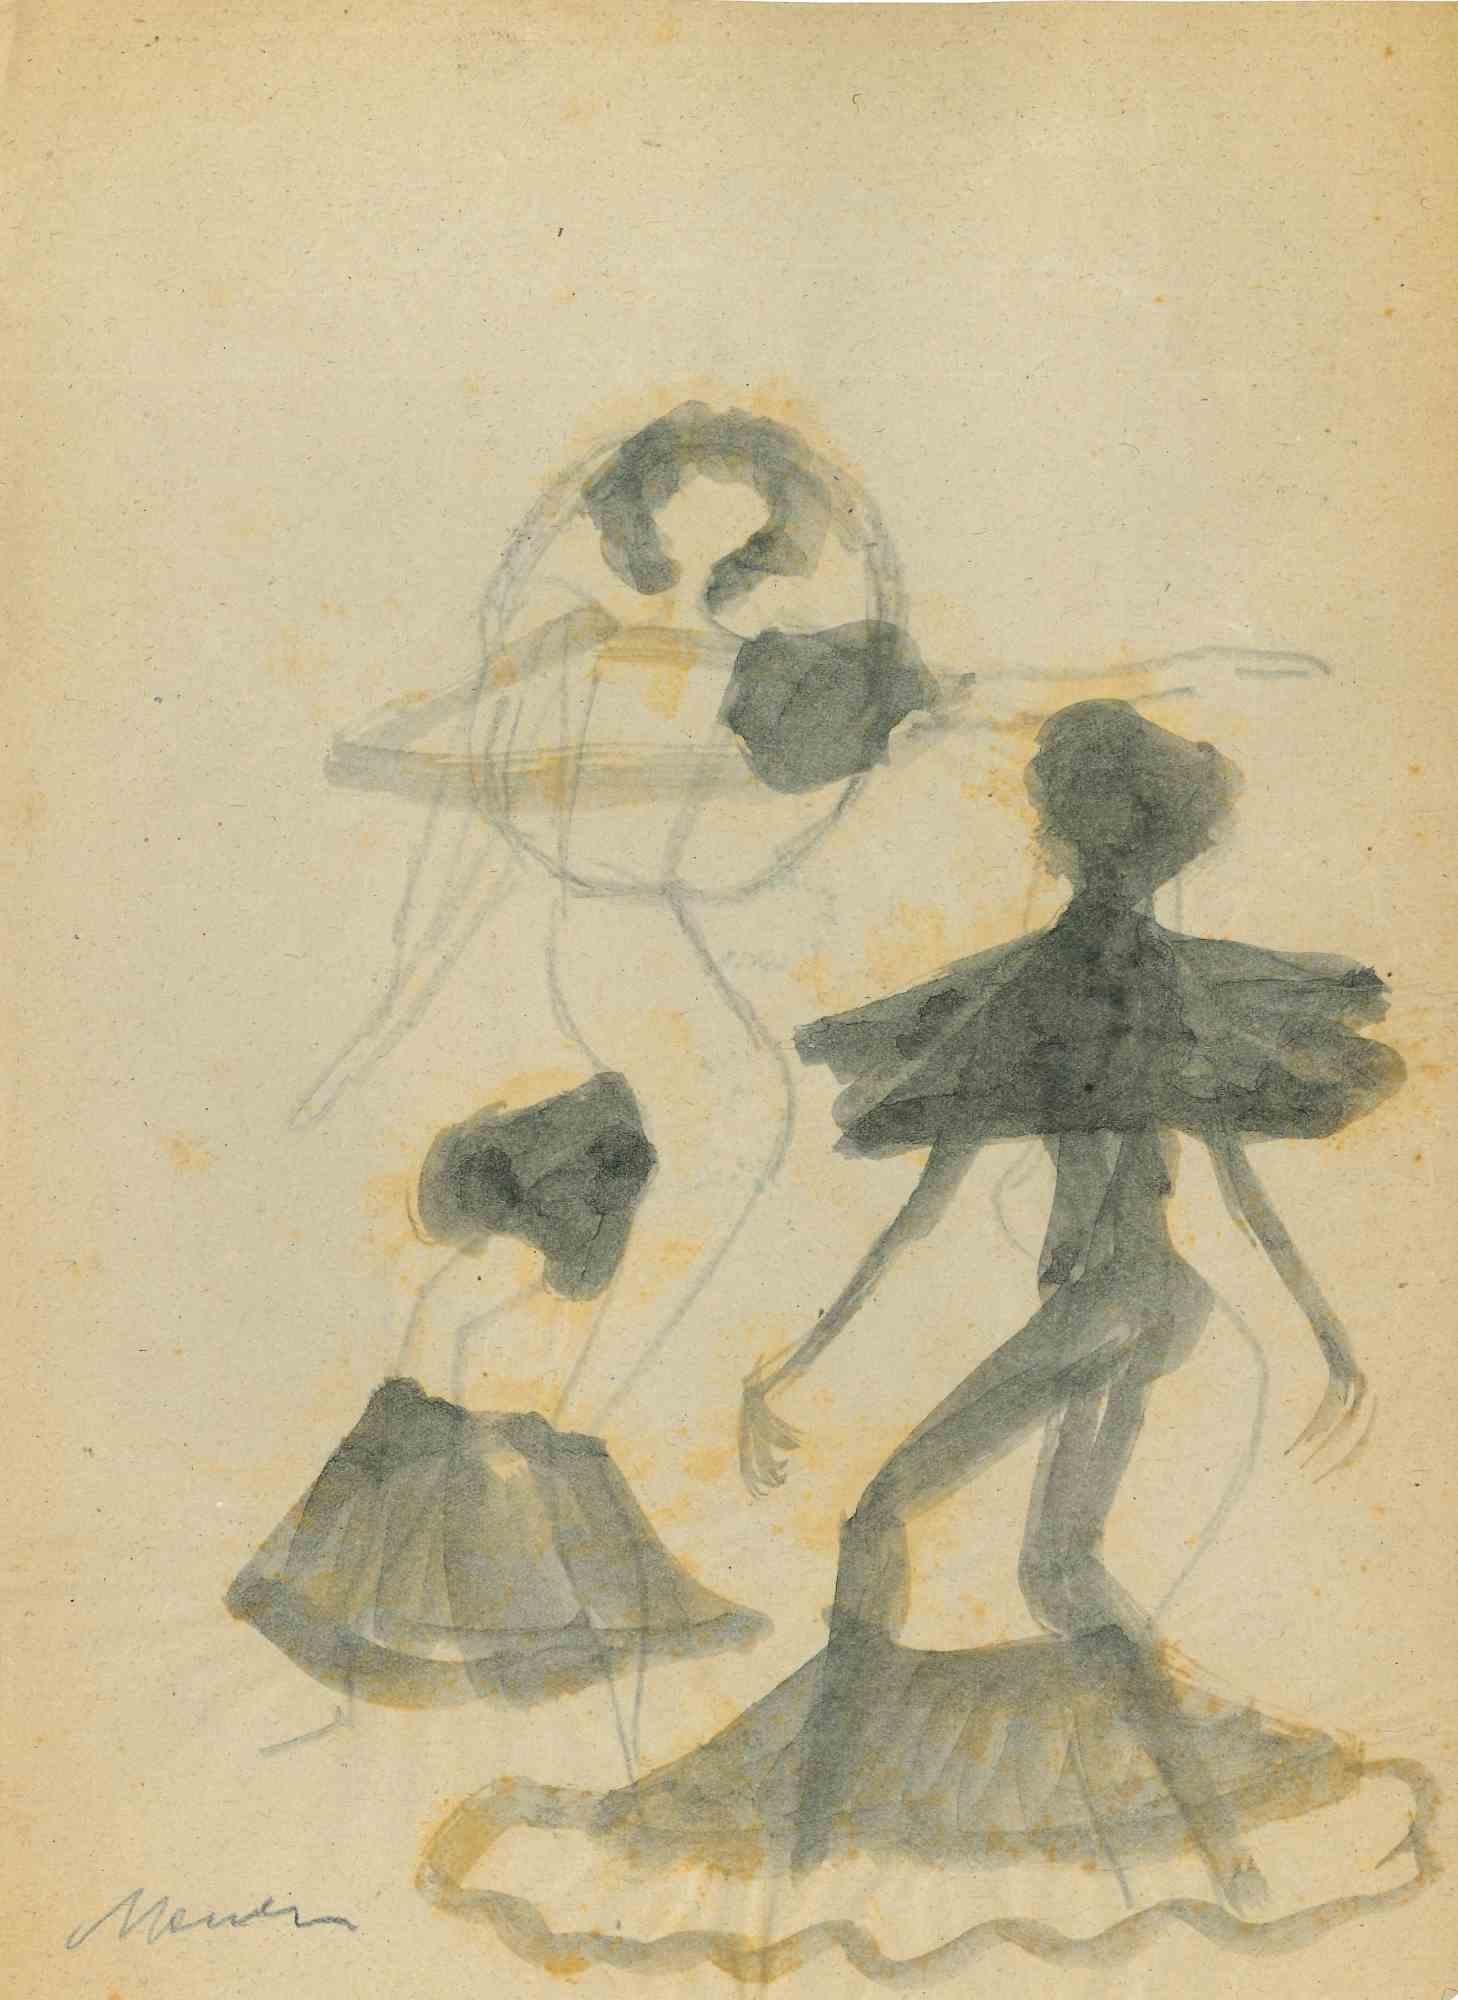 Dancers is a watercolor drawing realized by Mino Maccari  (1924-1989) in the Mid-20th Century.

Hand-signed.

Good conditions with slight foxing.

Mino Maccari (Siena, 1924-Rome, June 16, 1989) was an Italian writer, painter, engraver and